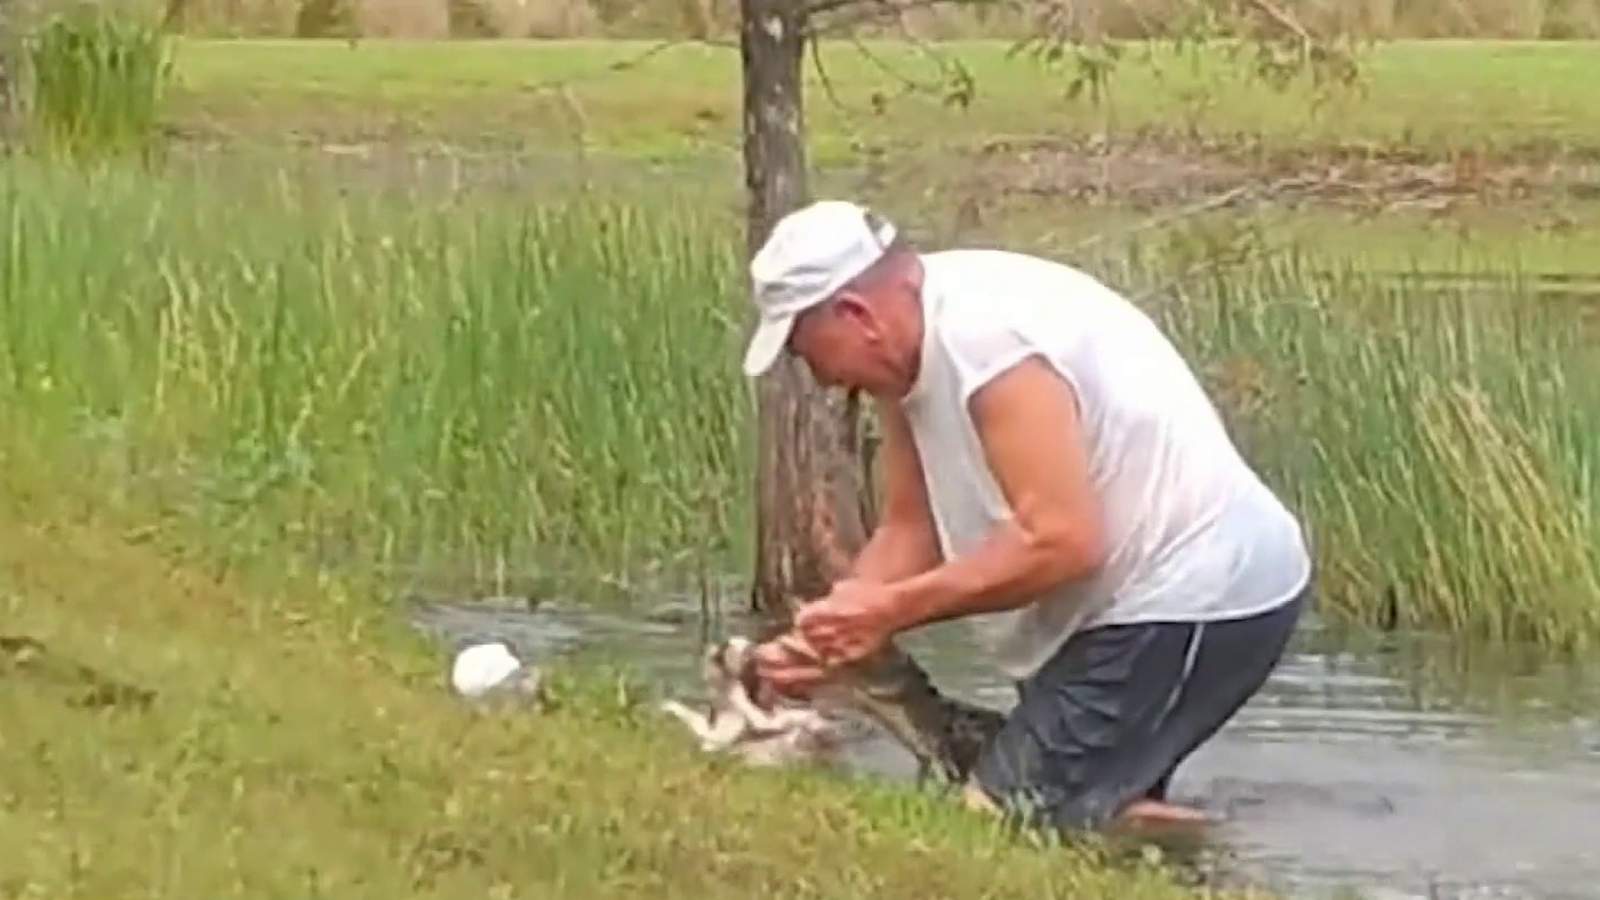 Florida man, 74, details rescuing his puppy from jaws of alligator